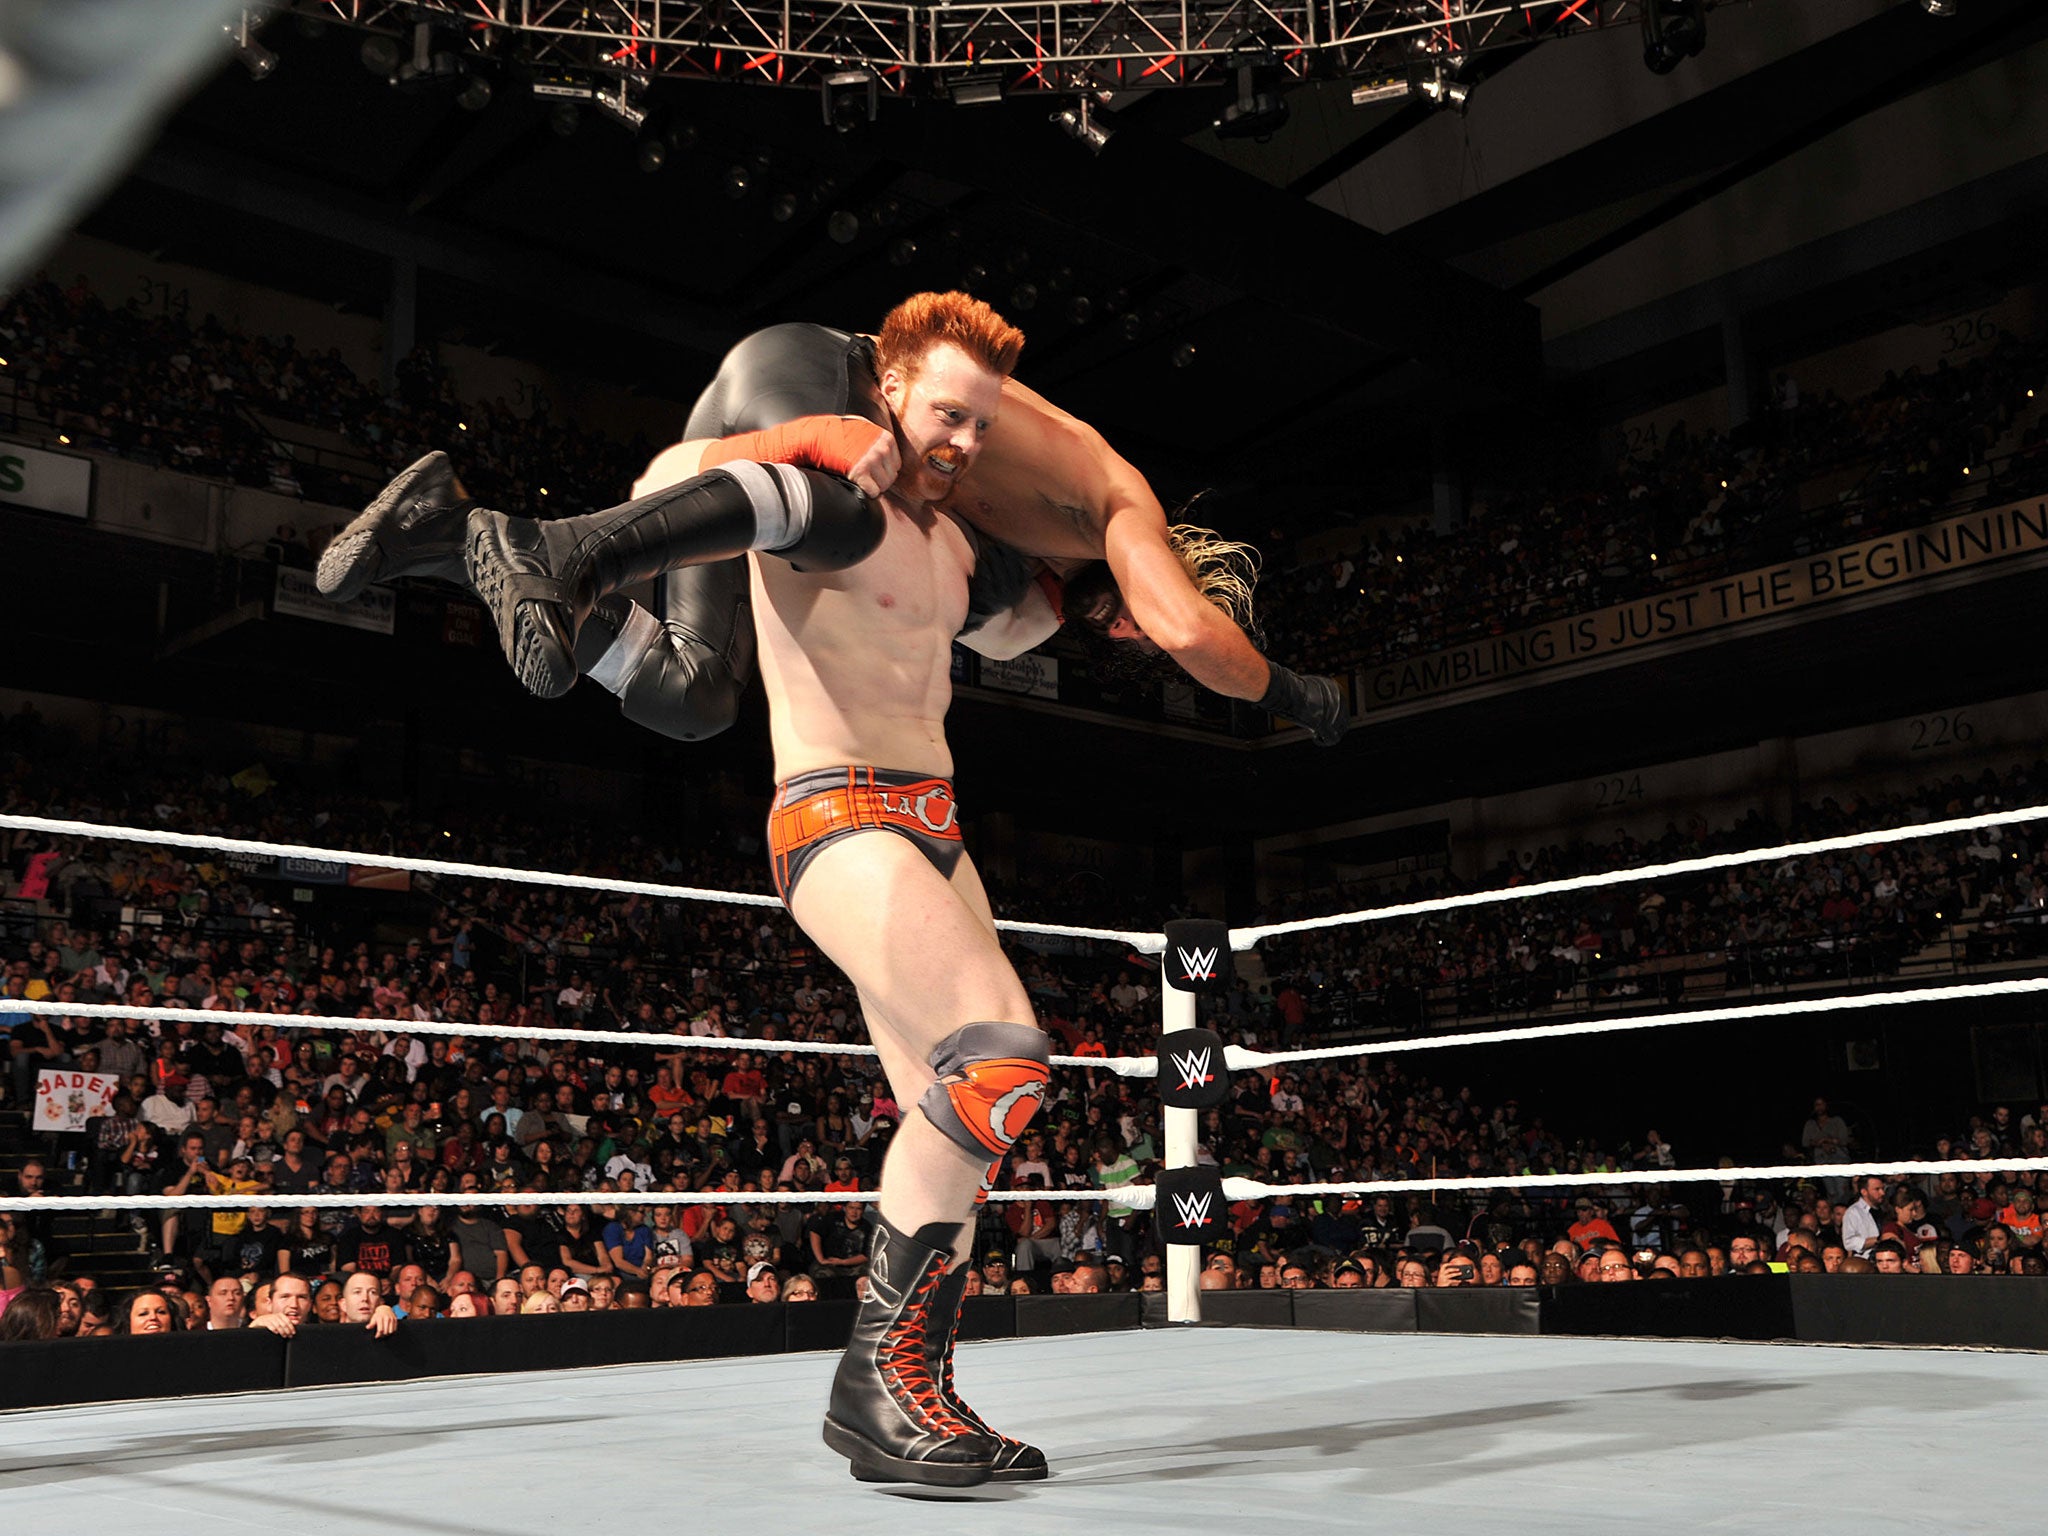 Sheamus hoist up Seth Rollins to deliver White Noise to Mr Money in the Bank